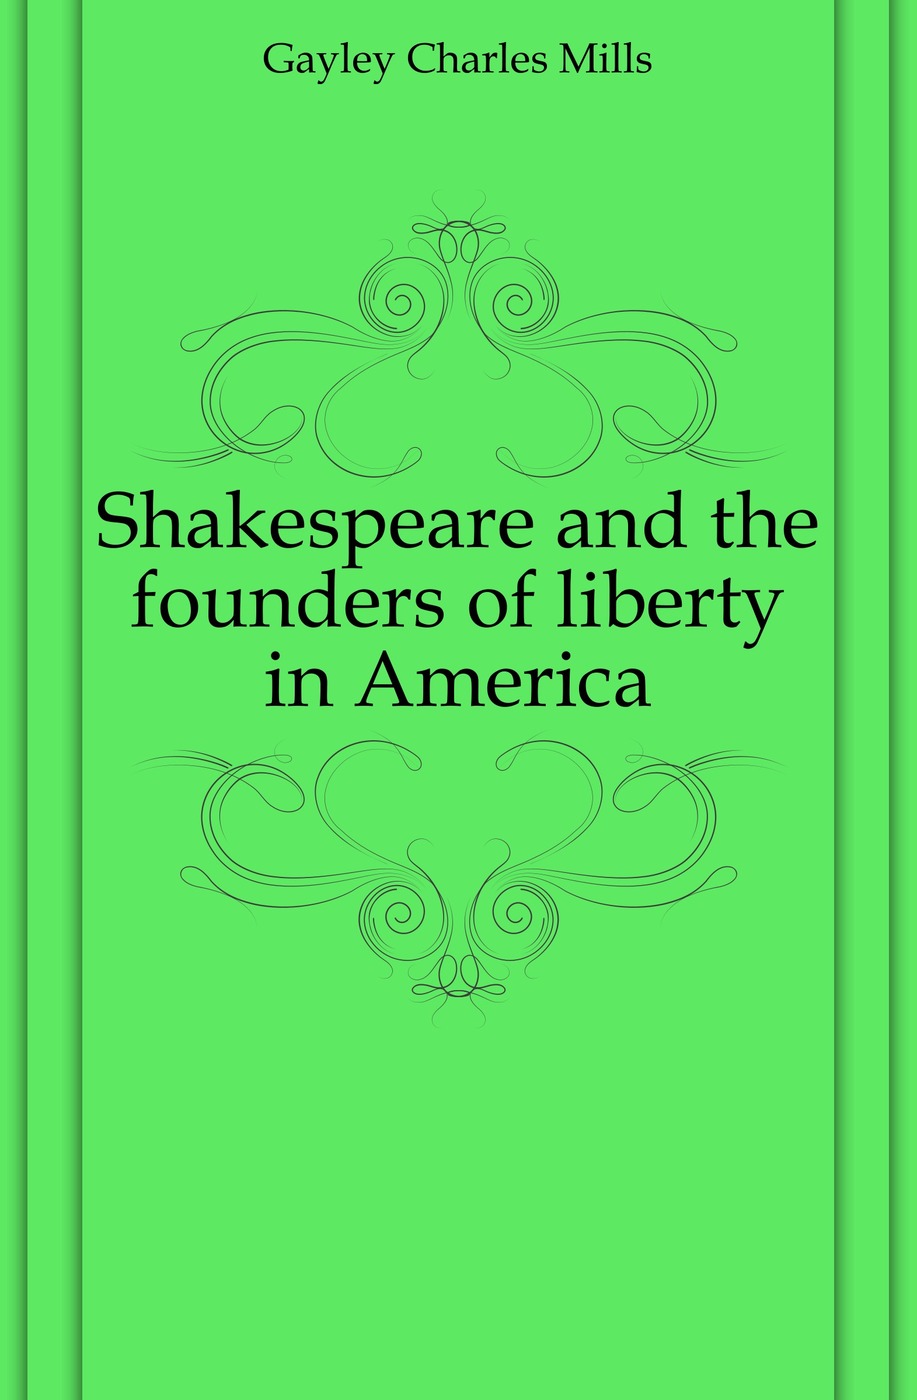 Shakespeare and the founders of liberty in America